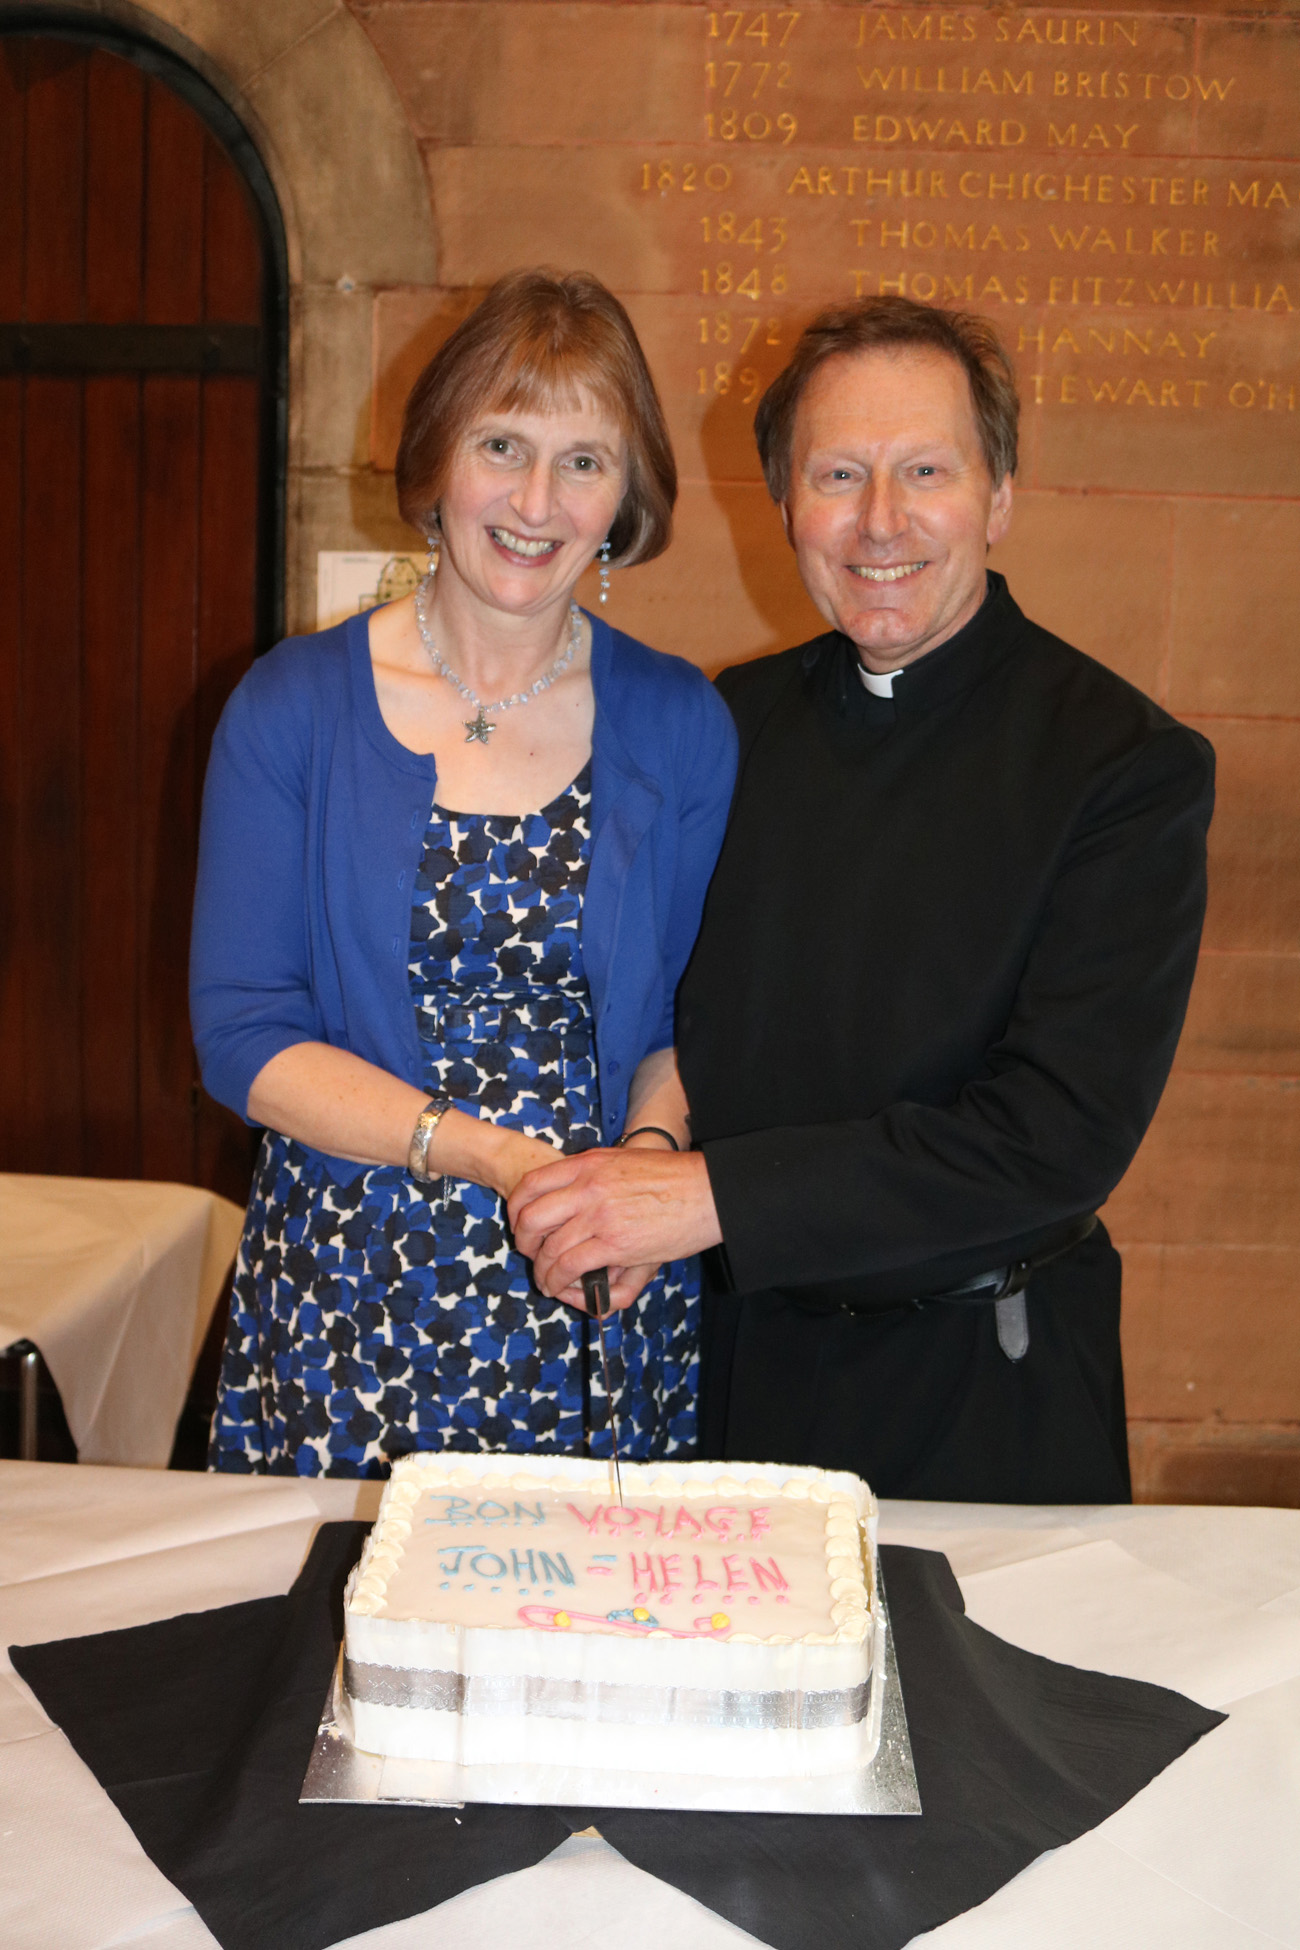 Dean John and Mrs Helen Mann prepare to cut the farewell cake at the reception which followed the Farewell Choral Evensong.